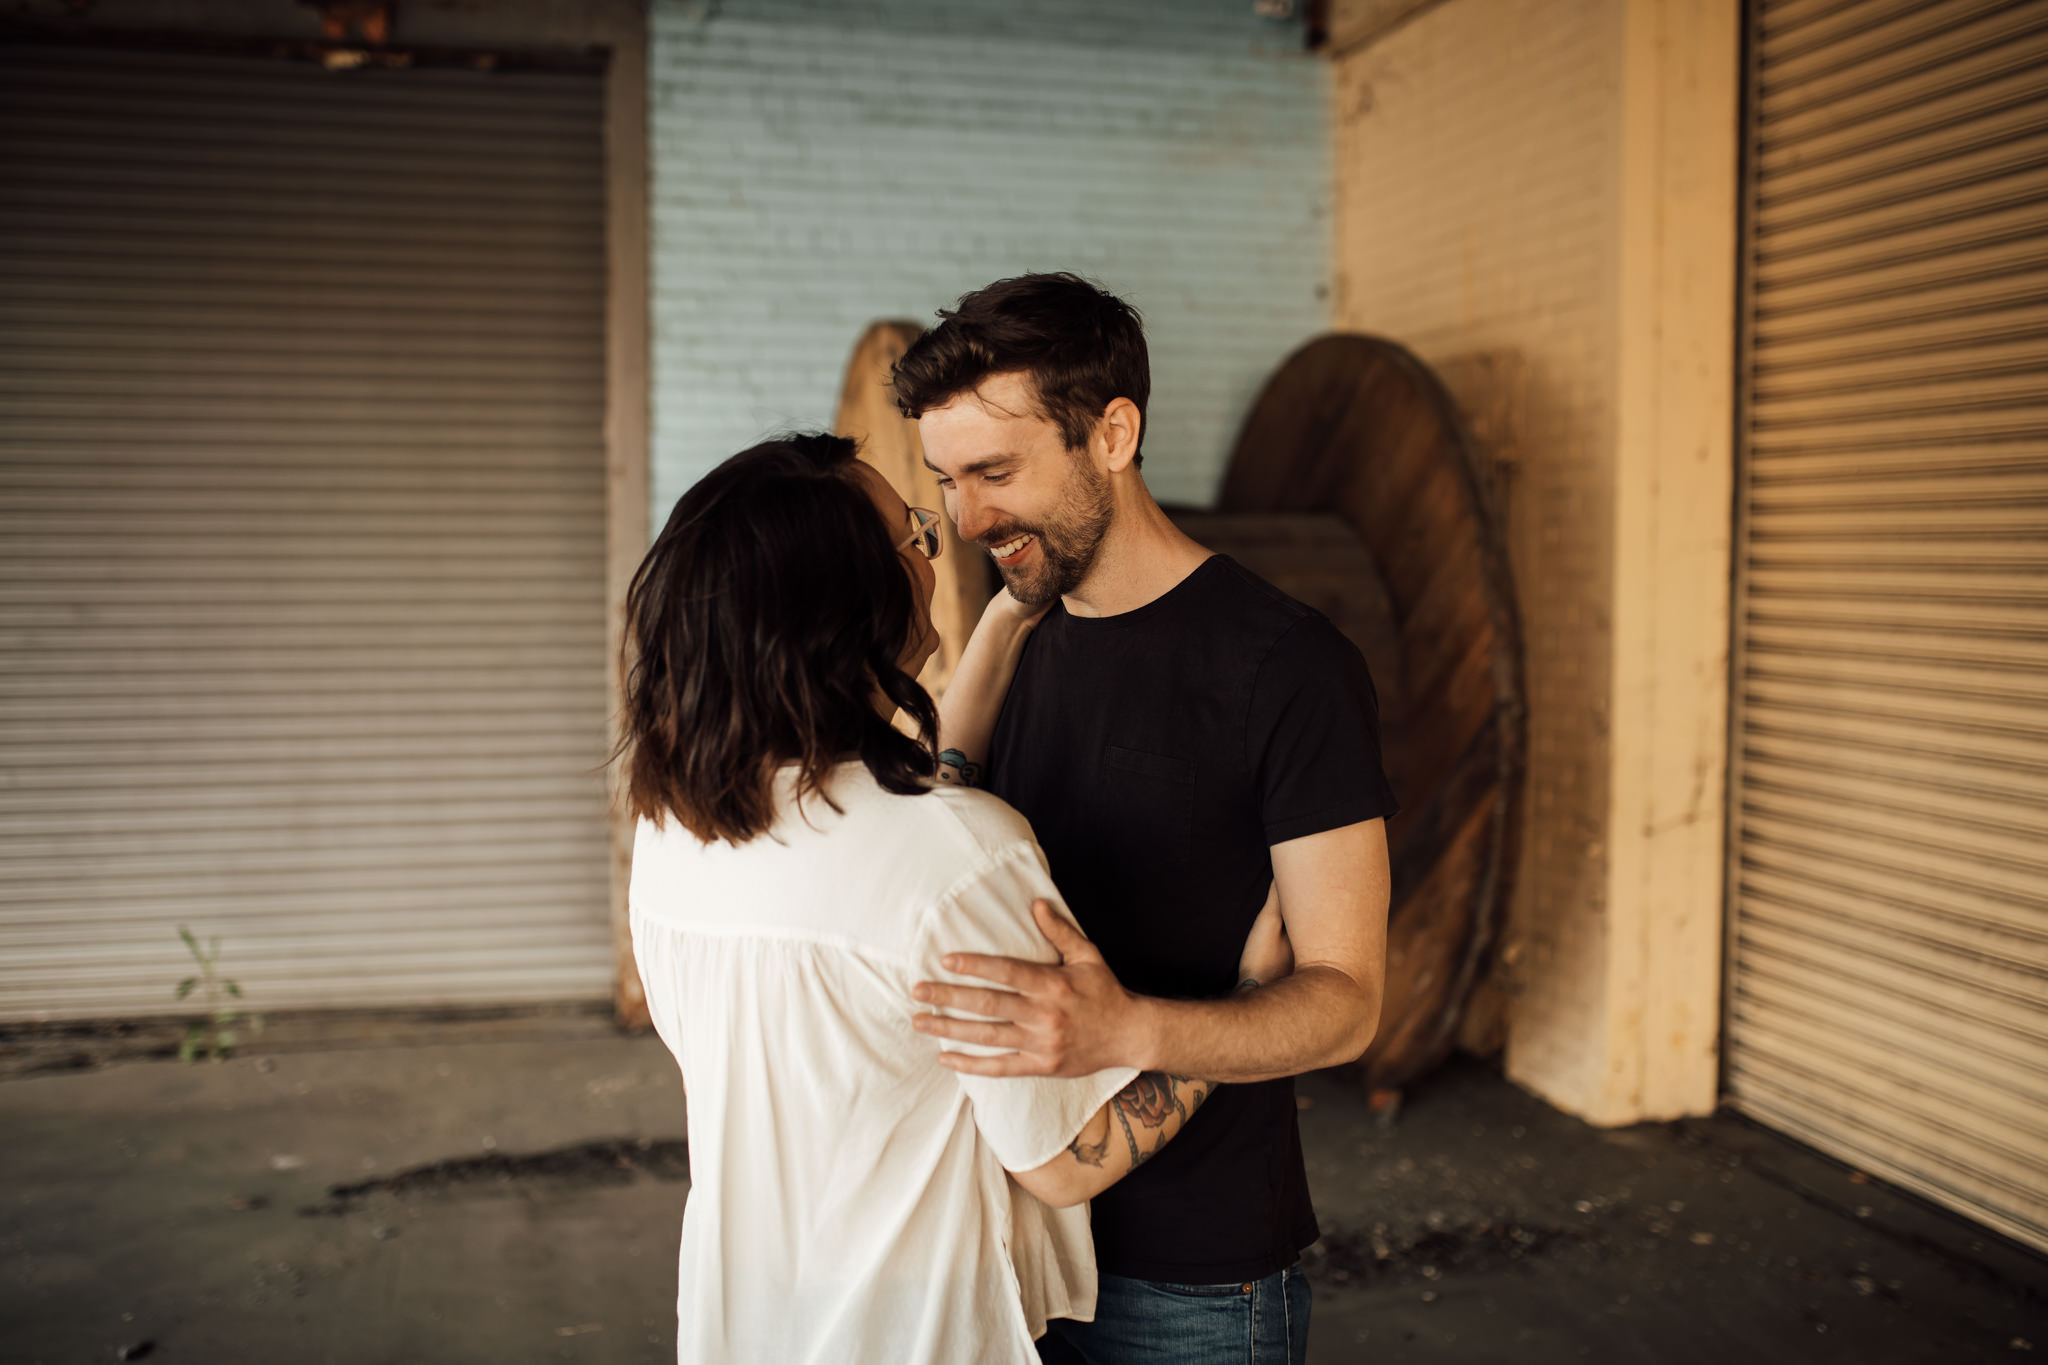 memphis-wedding-photographer-the-warmth-around-you-unique-colorful-engagement-pictures (67 of 80).jpg